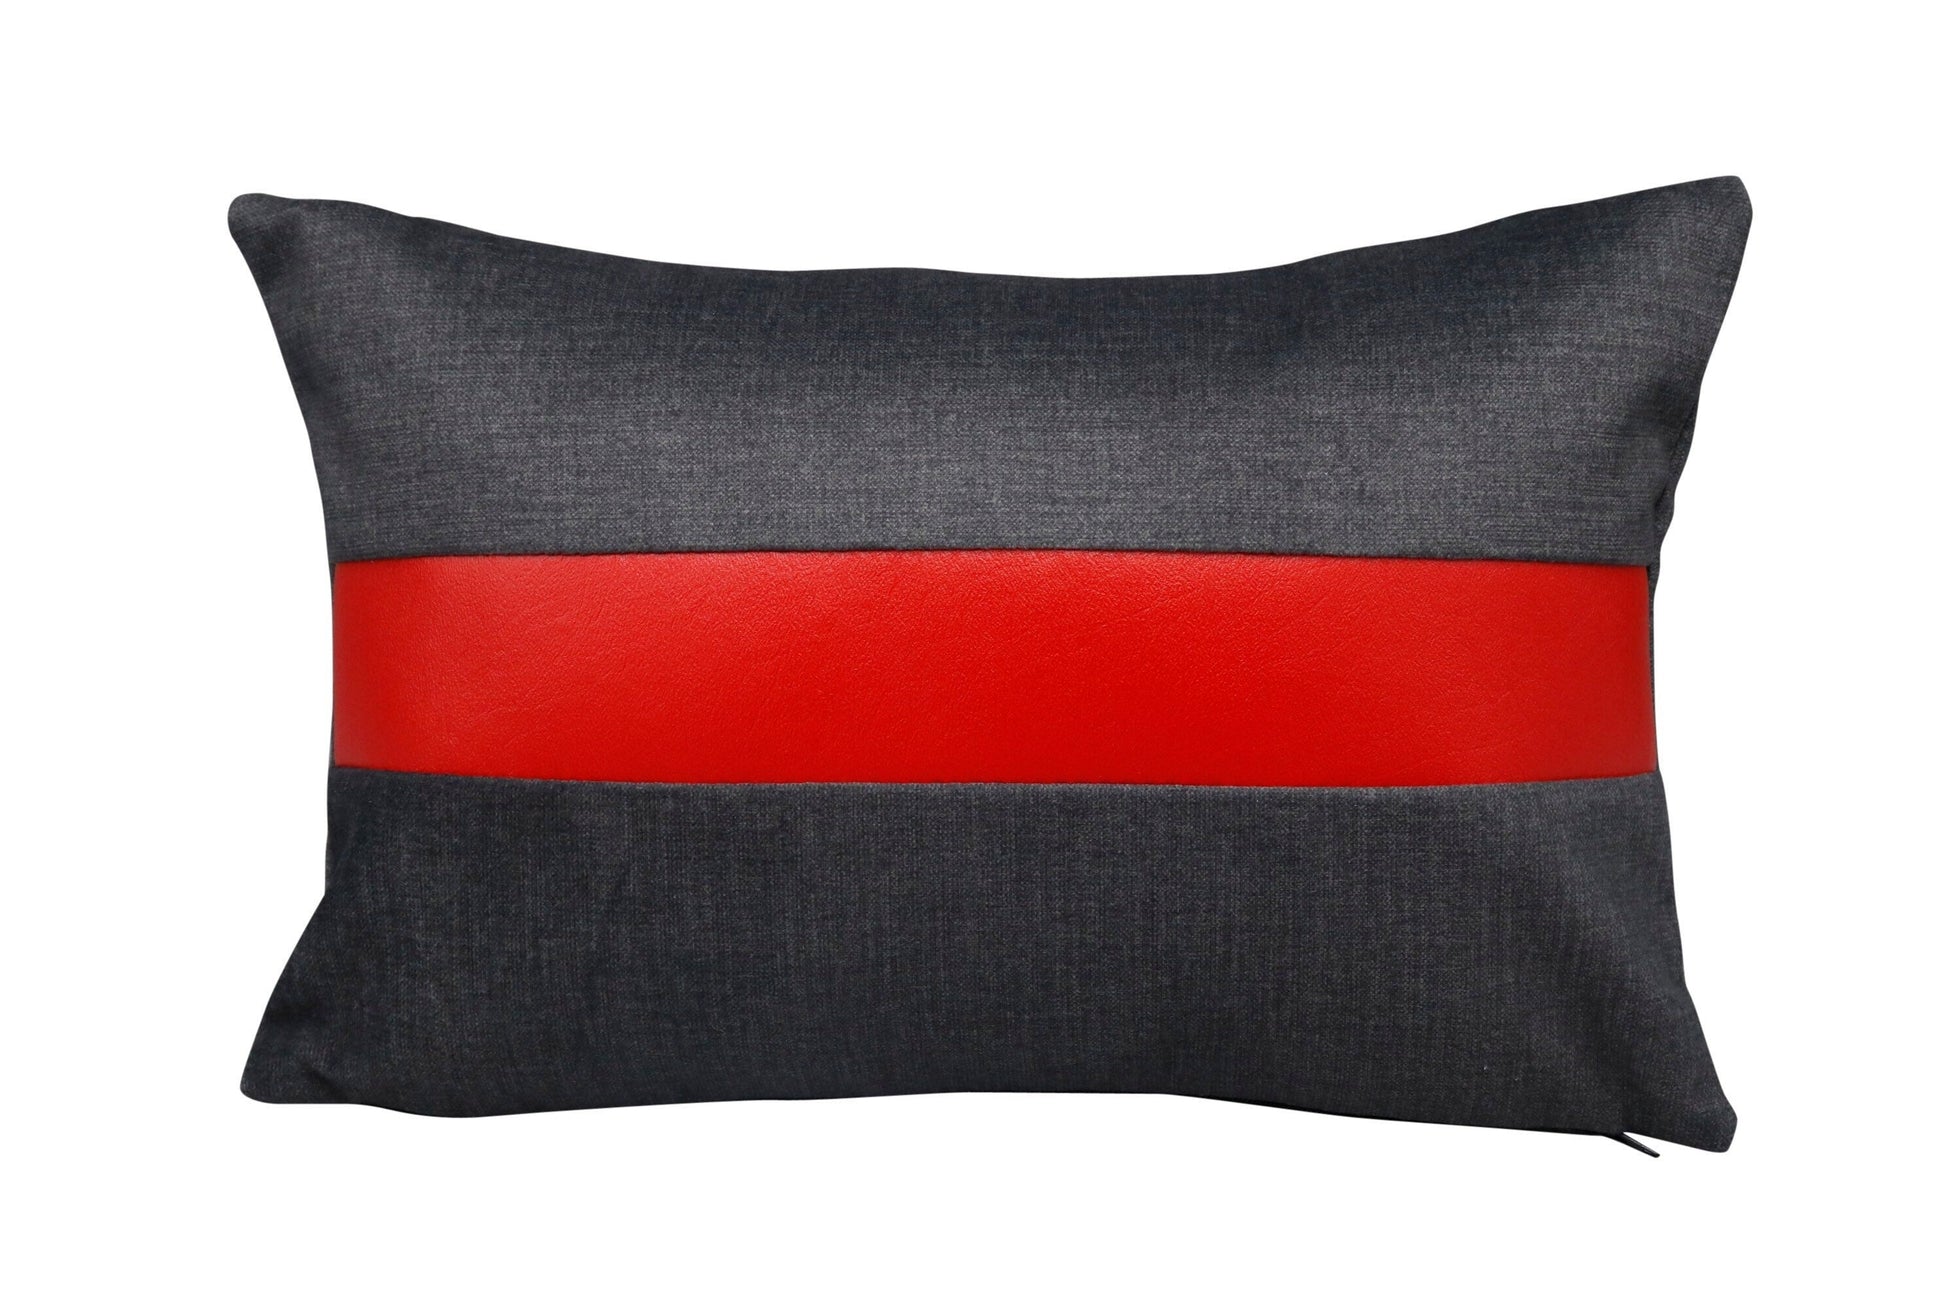 Handmade artisan lumber pillow with gray velvet and red Naugahyde stripe” 10x15” inches Comes with an insert